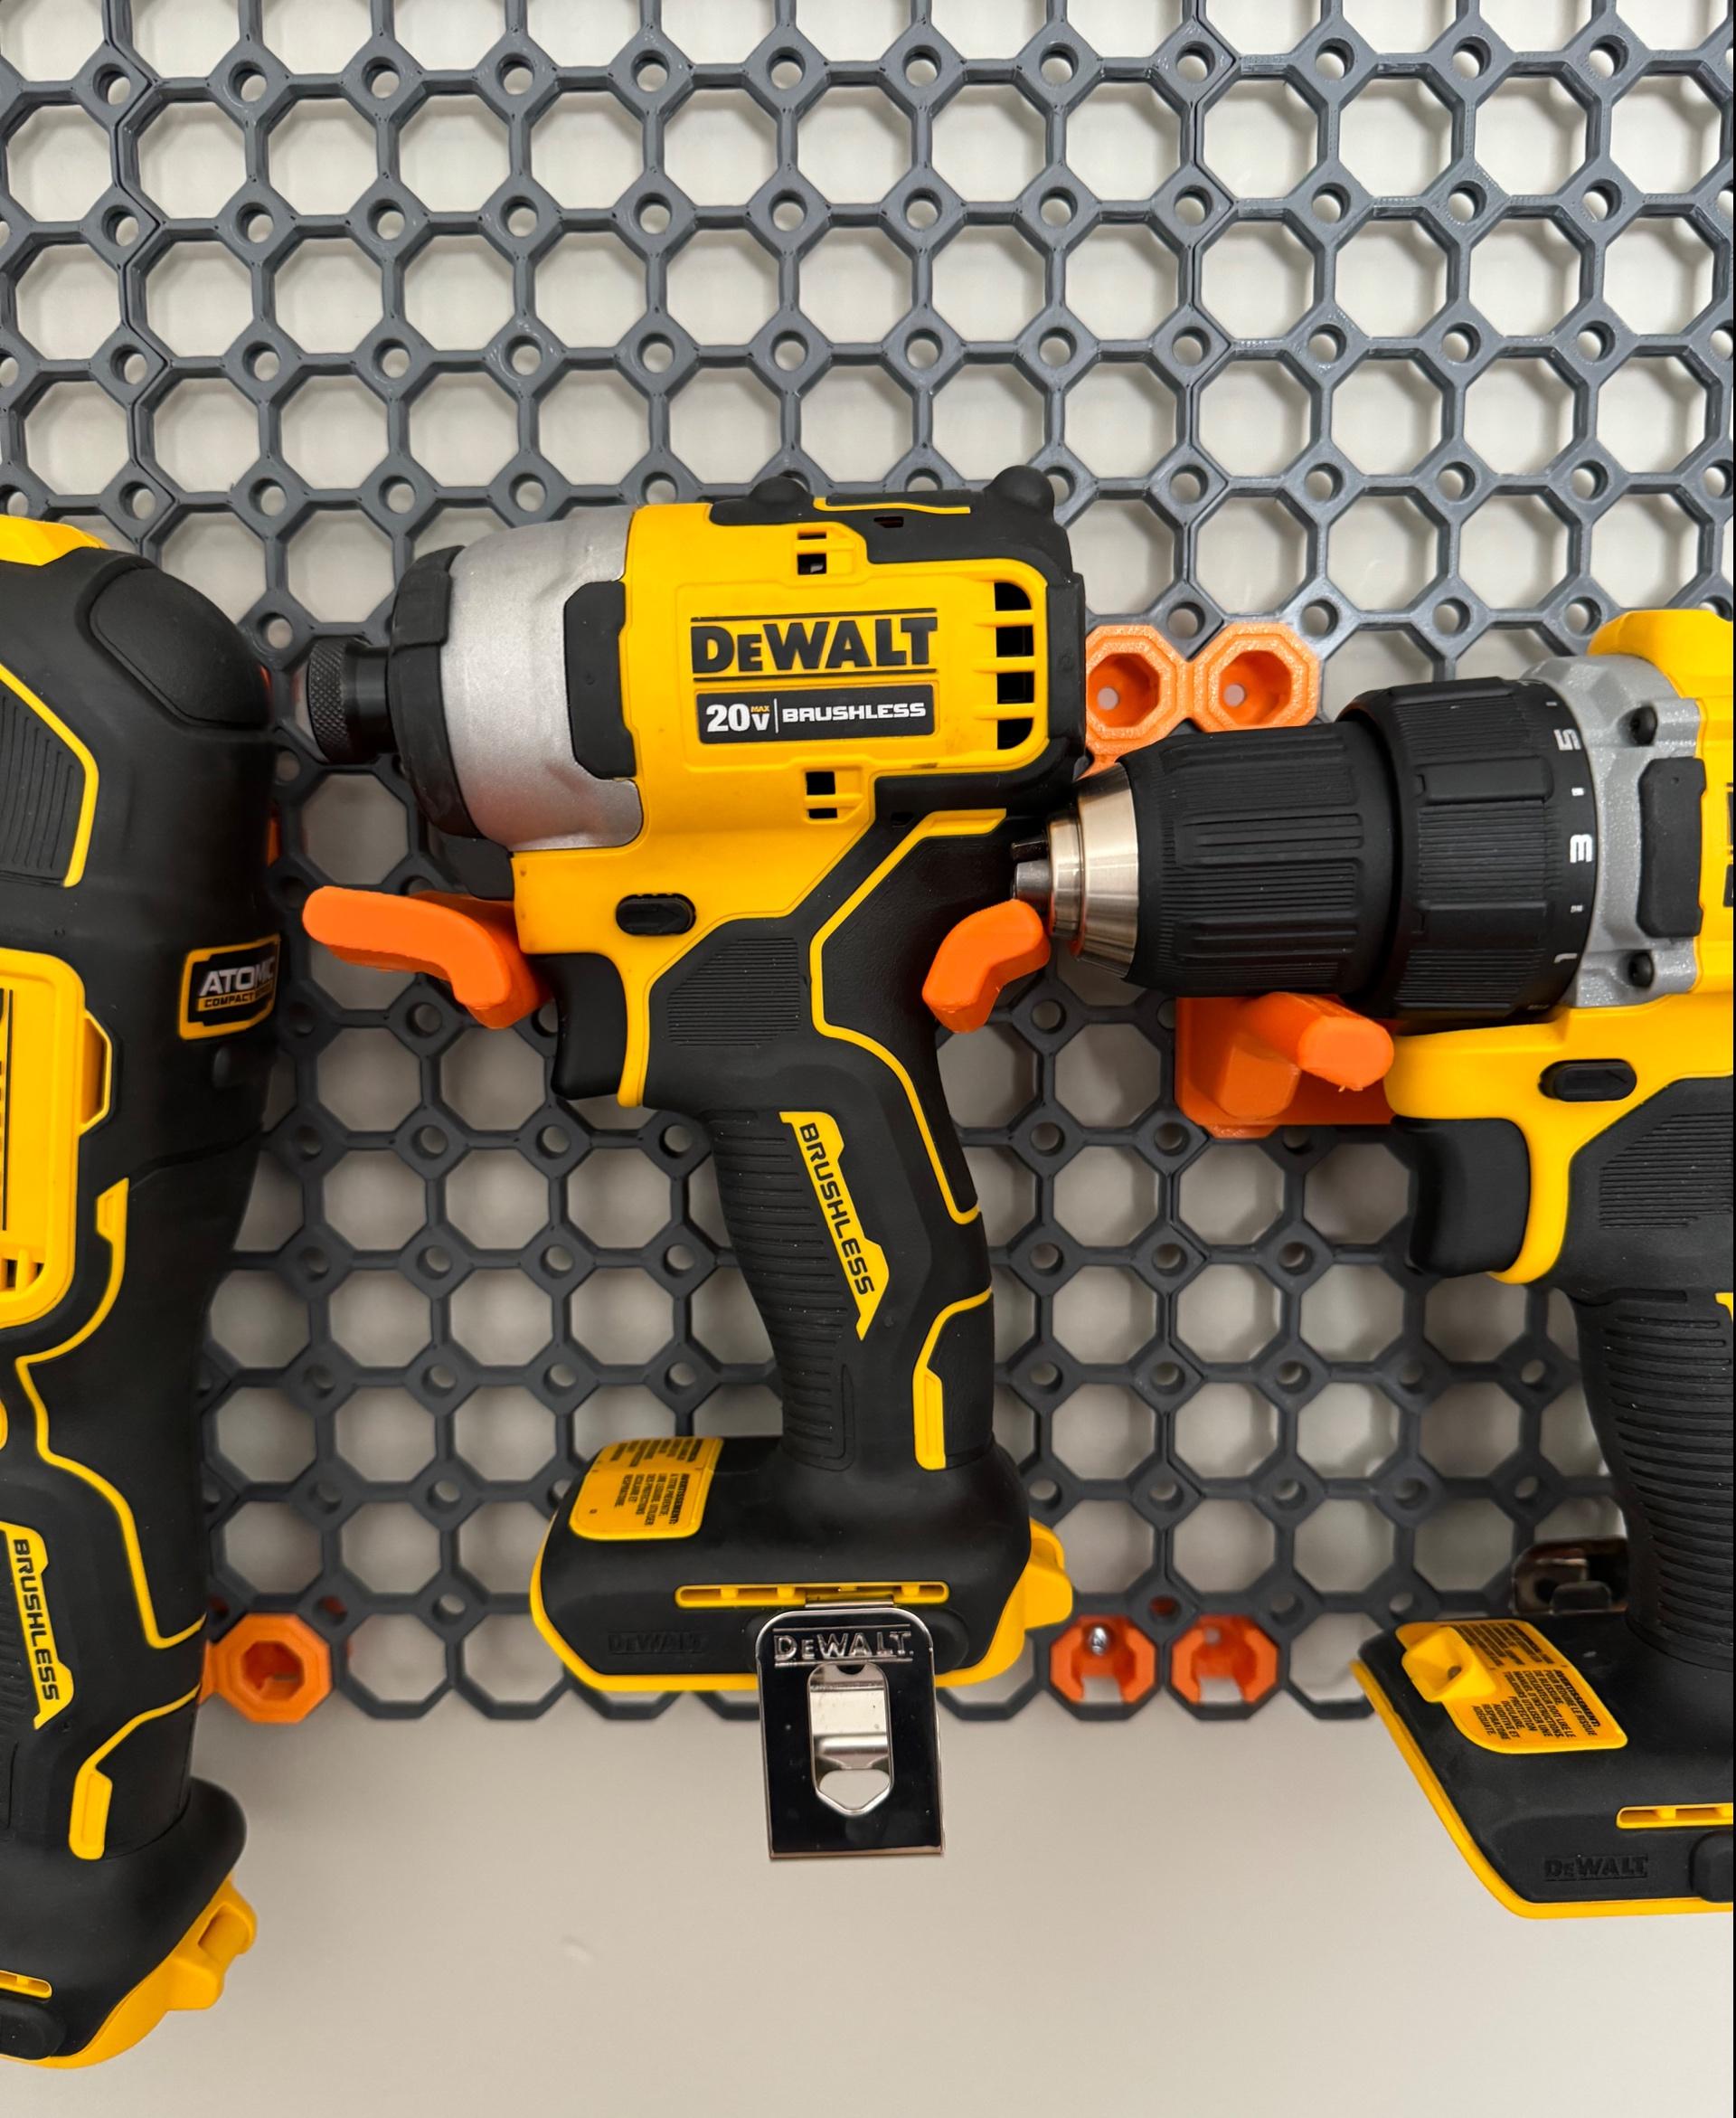 Multiboard Angled Drill Holder - Fits DeWalt drills very well. Thanks for sharing! - 3d model